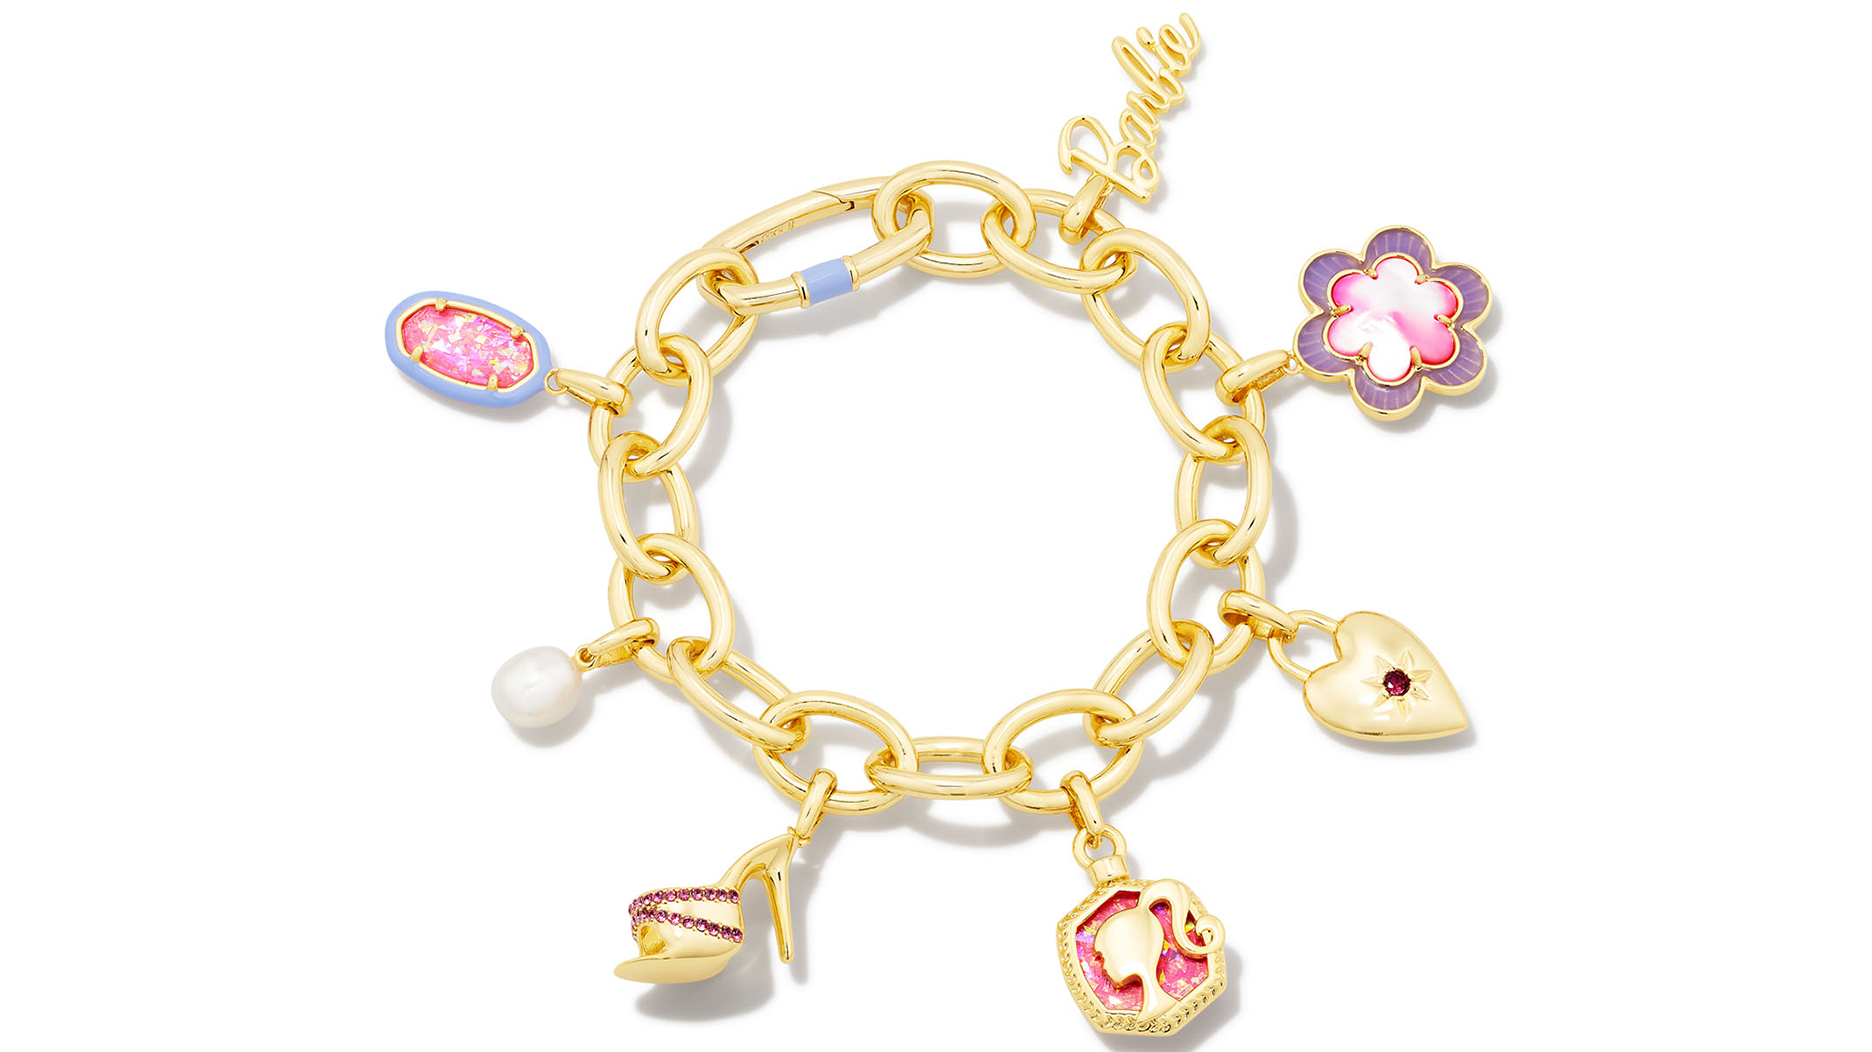 Kendra Scott launches Barbie jewelry collaboration